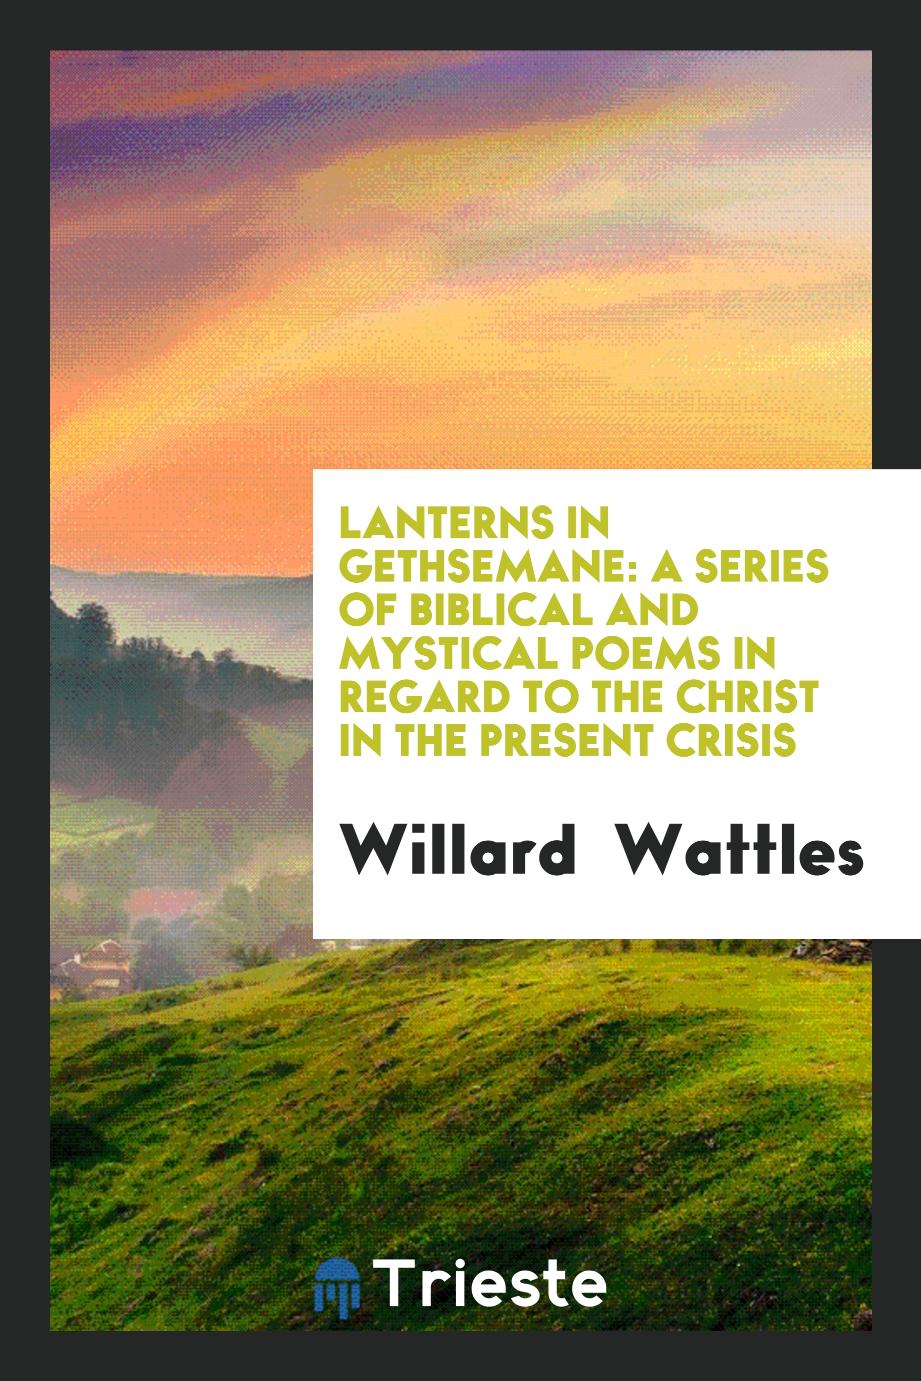 Lanterns in Gethsemane: A Series of Biblical and Mystical Poems in Regard to the Christ in the Present Crisis